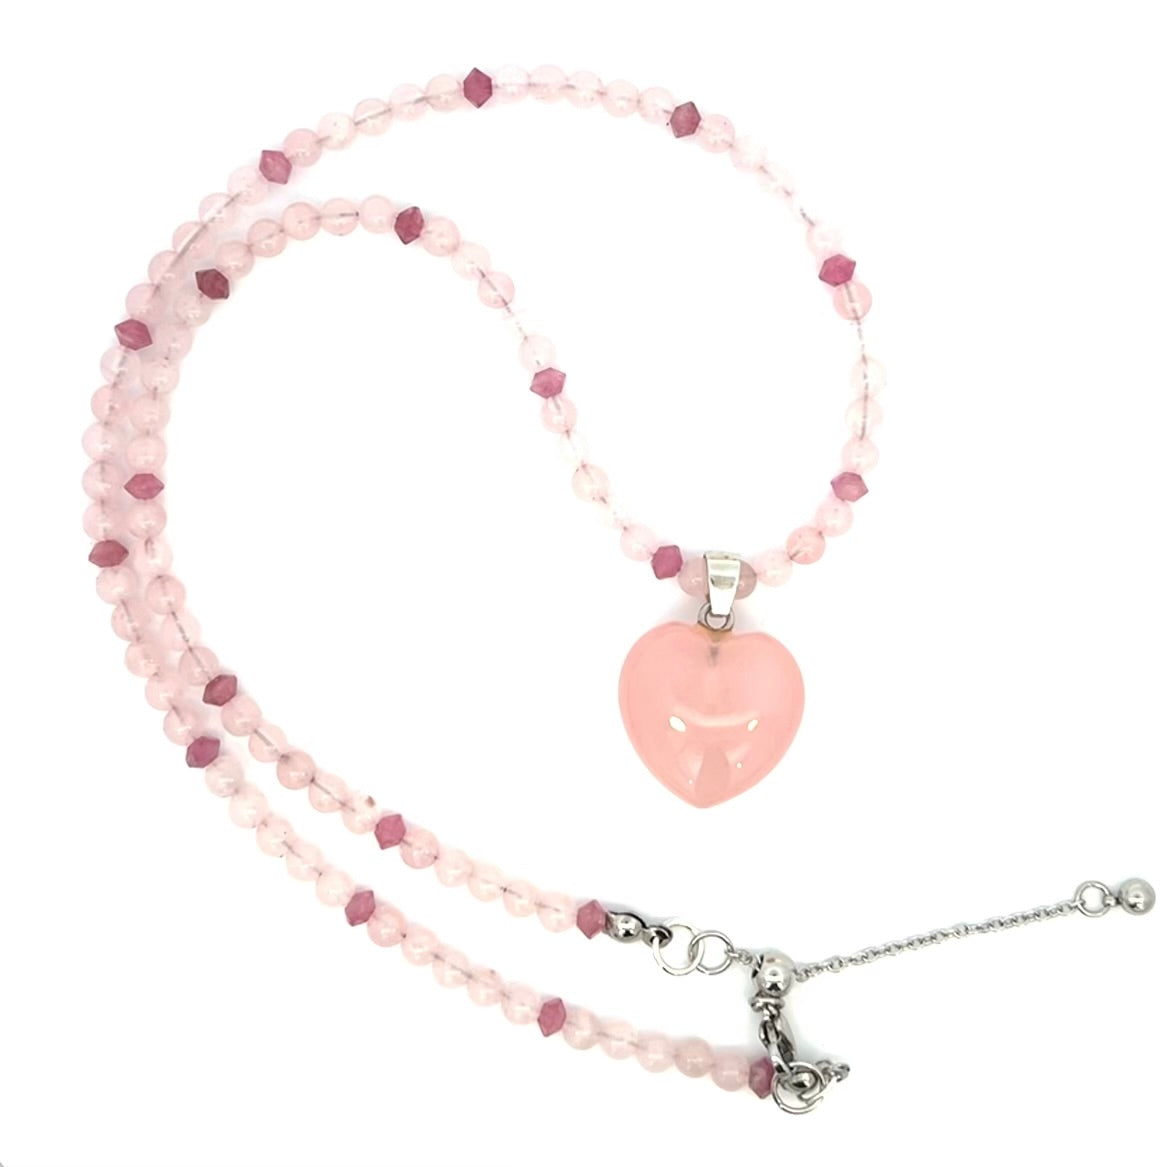 Pink Rose Quartz Puffy Heart Pendant With Tourmaline Chain Necklace Stainless